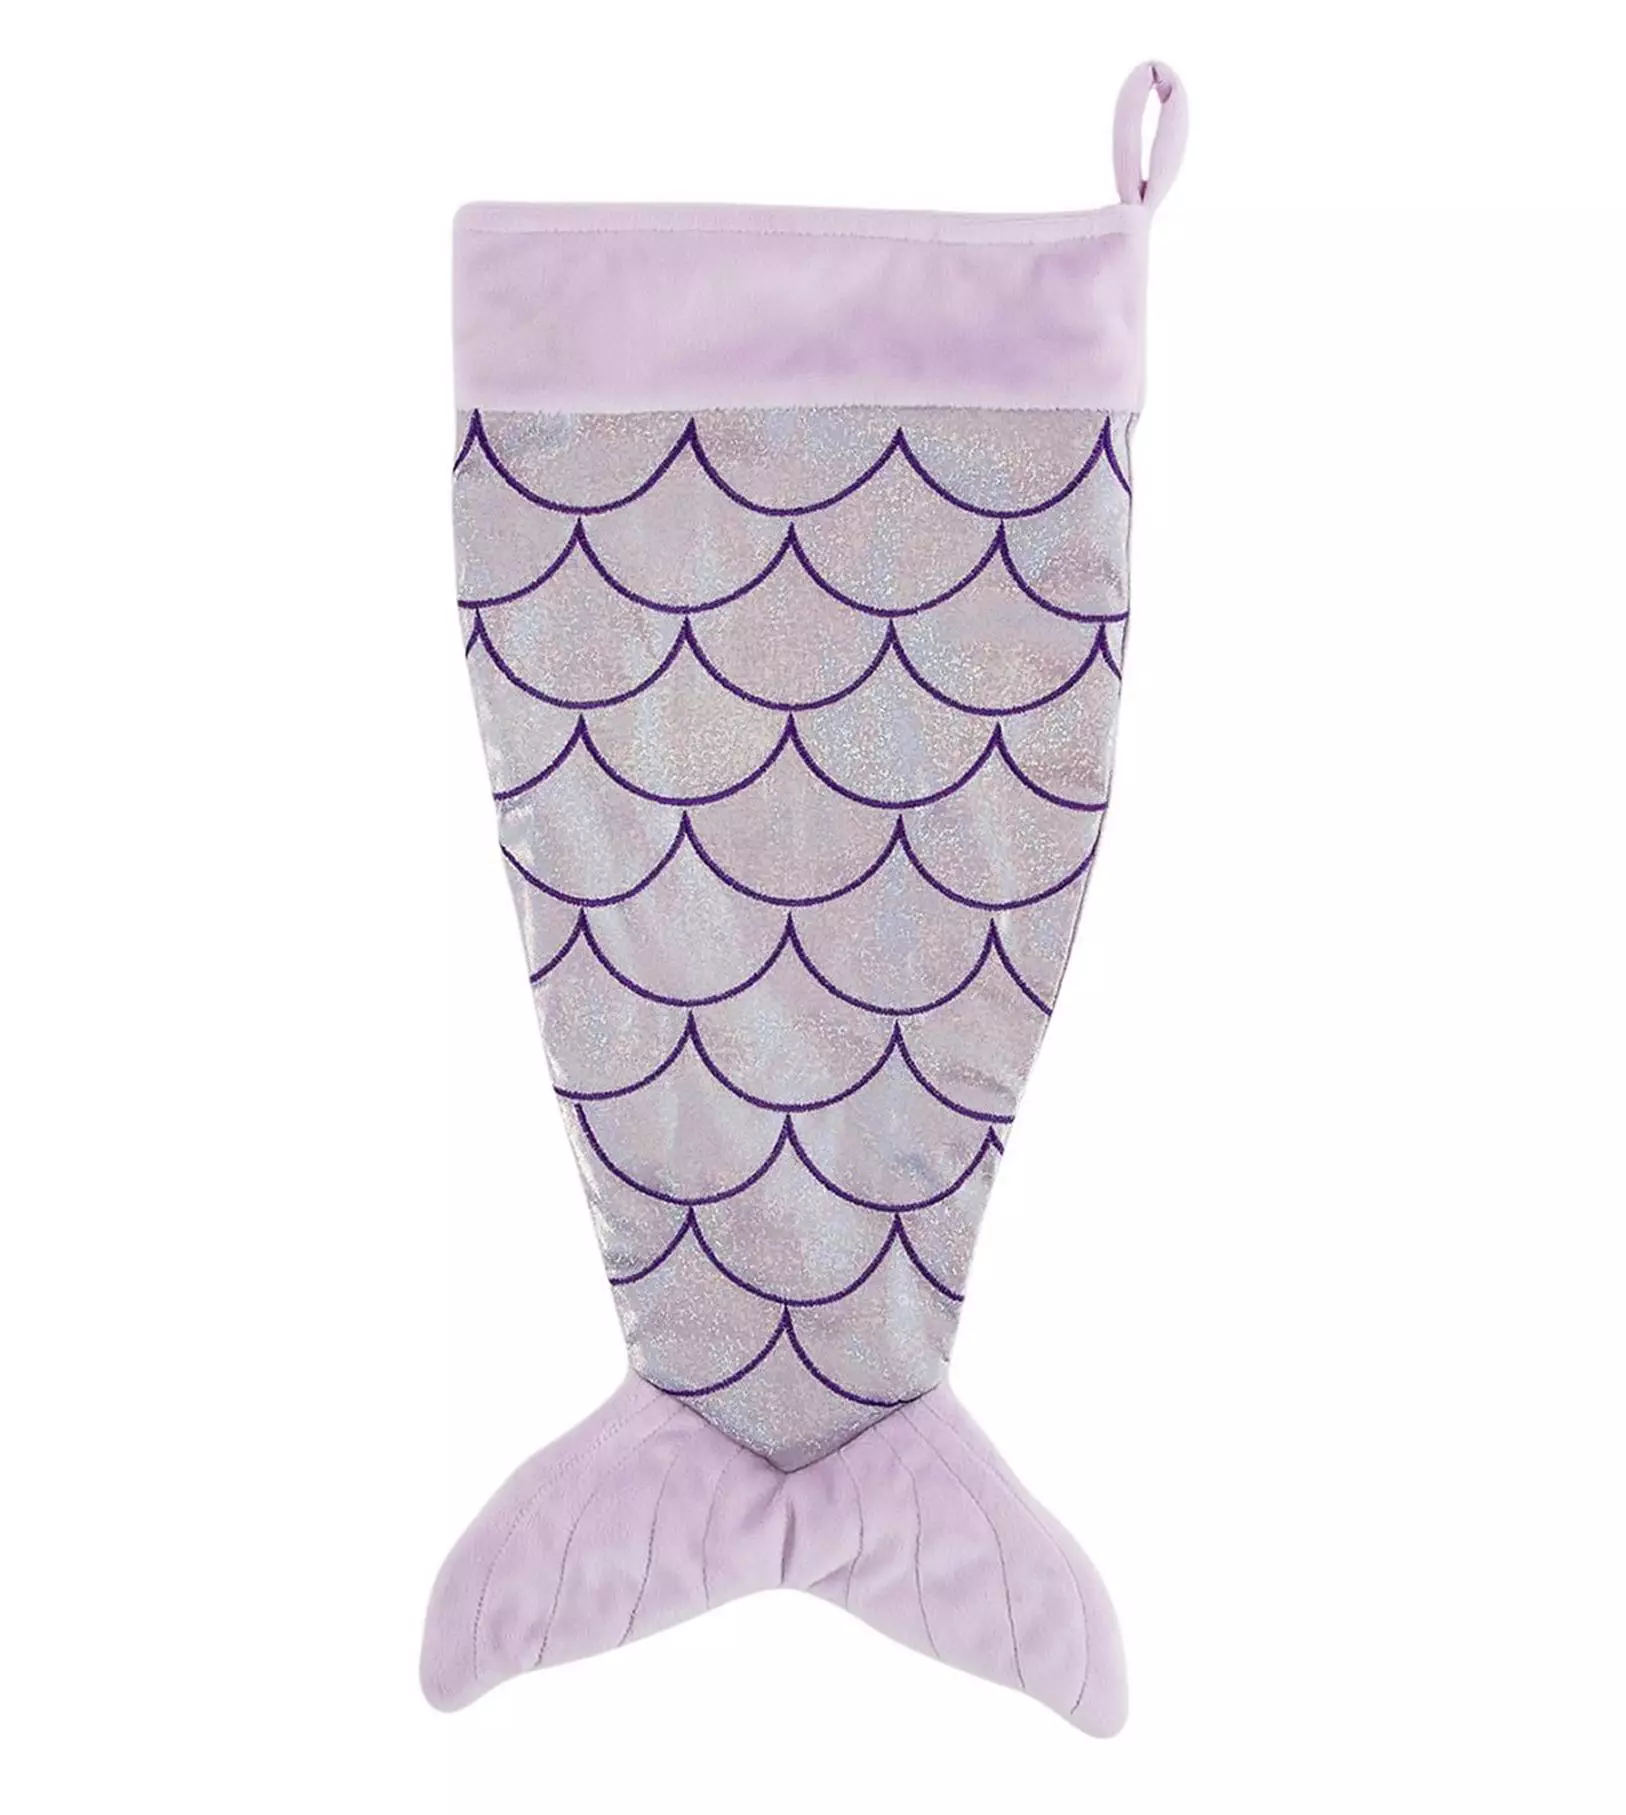 If not, why not go for a mermaid option? (